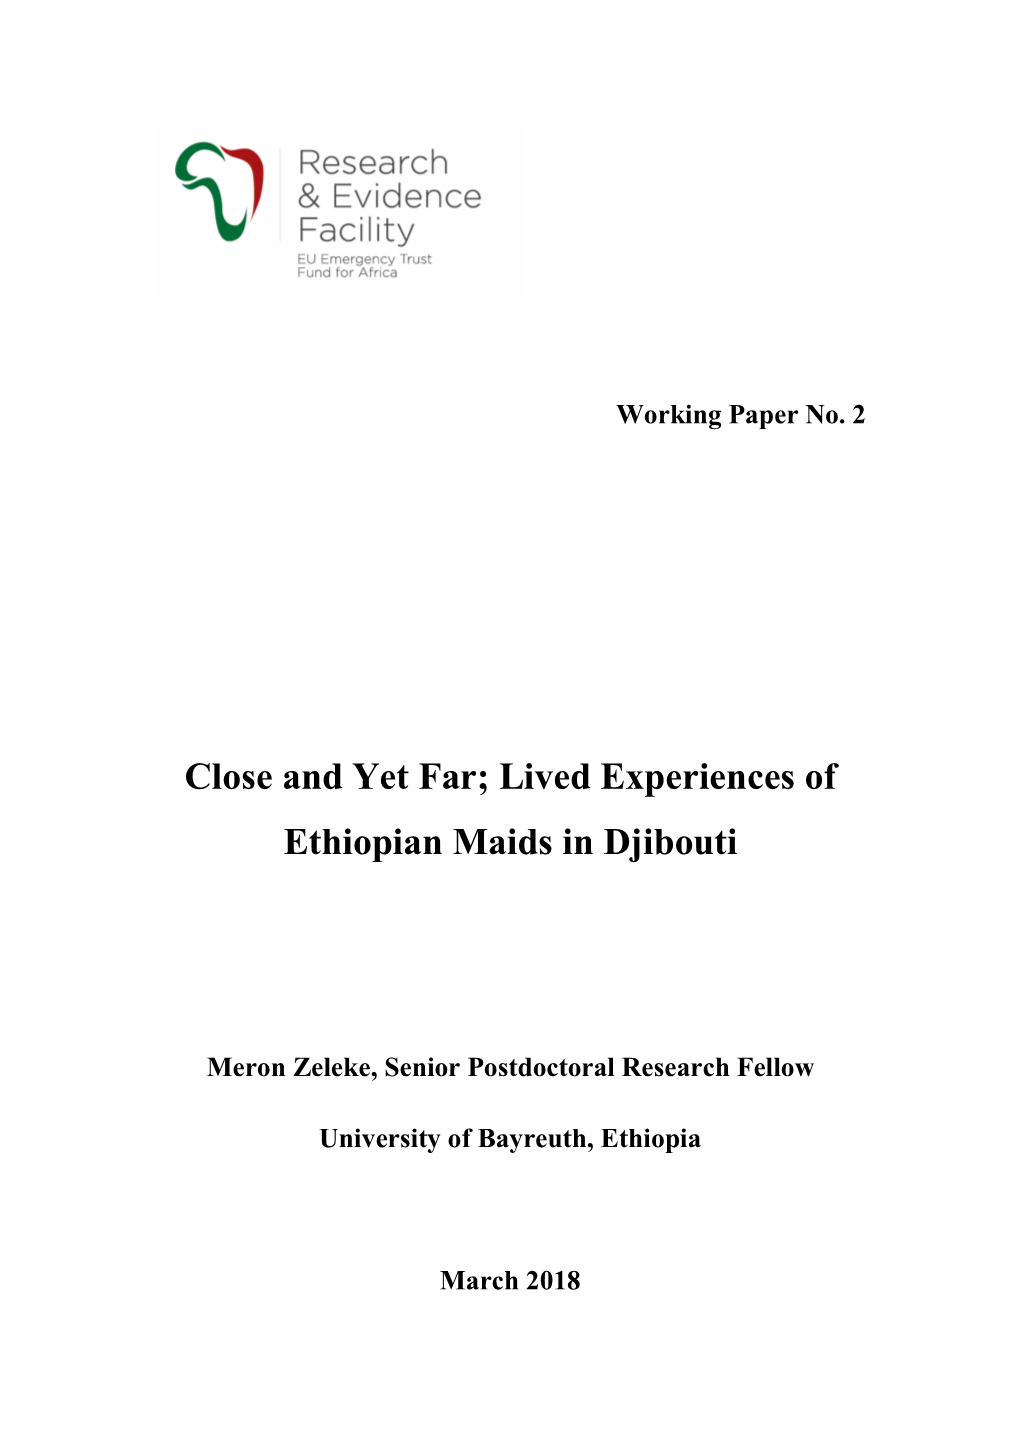 Close and Yet Far; Lived Experiences of Ethiopian Maids in Djibouti